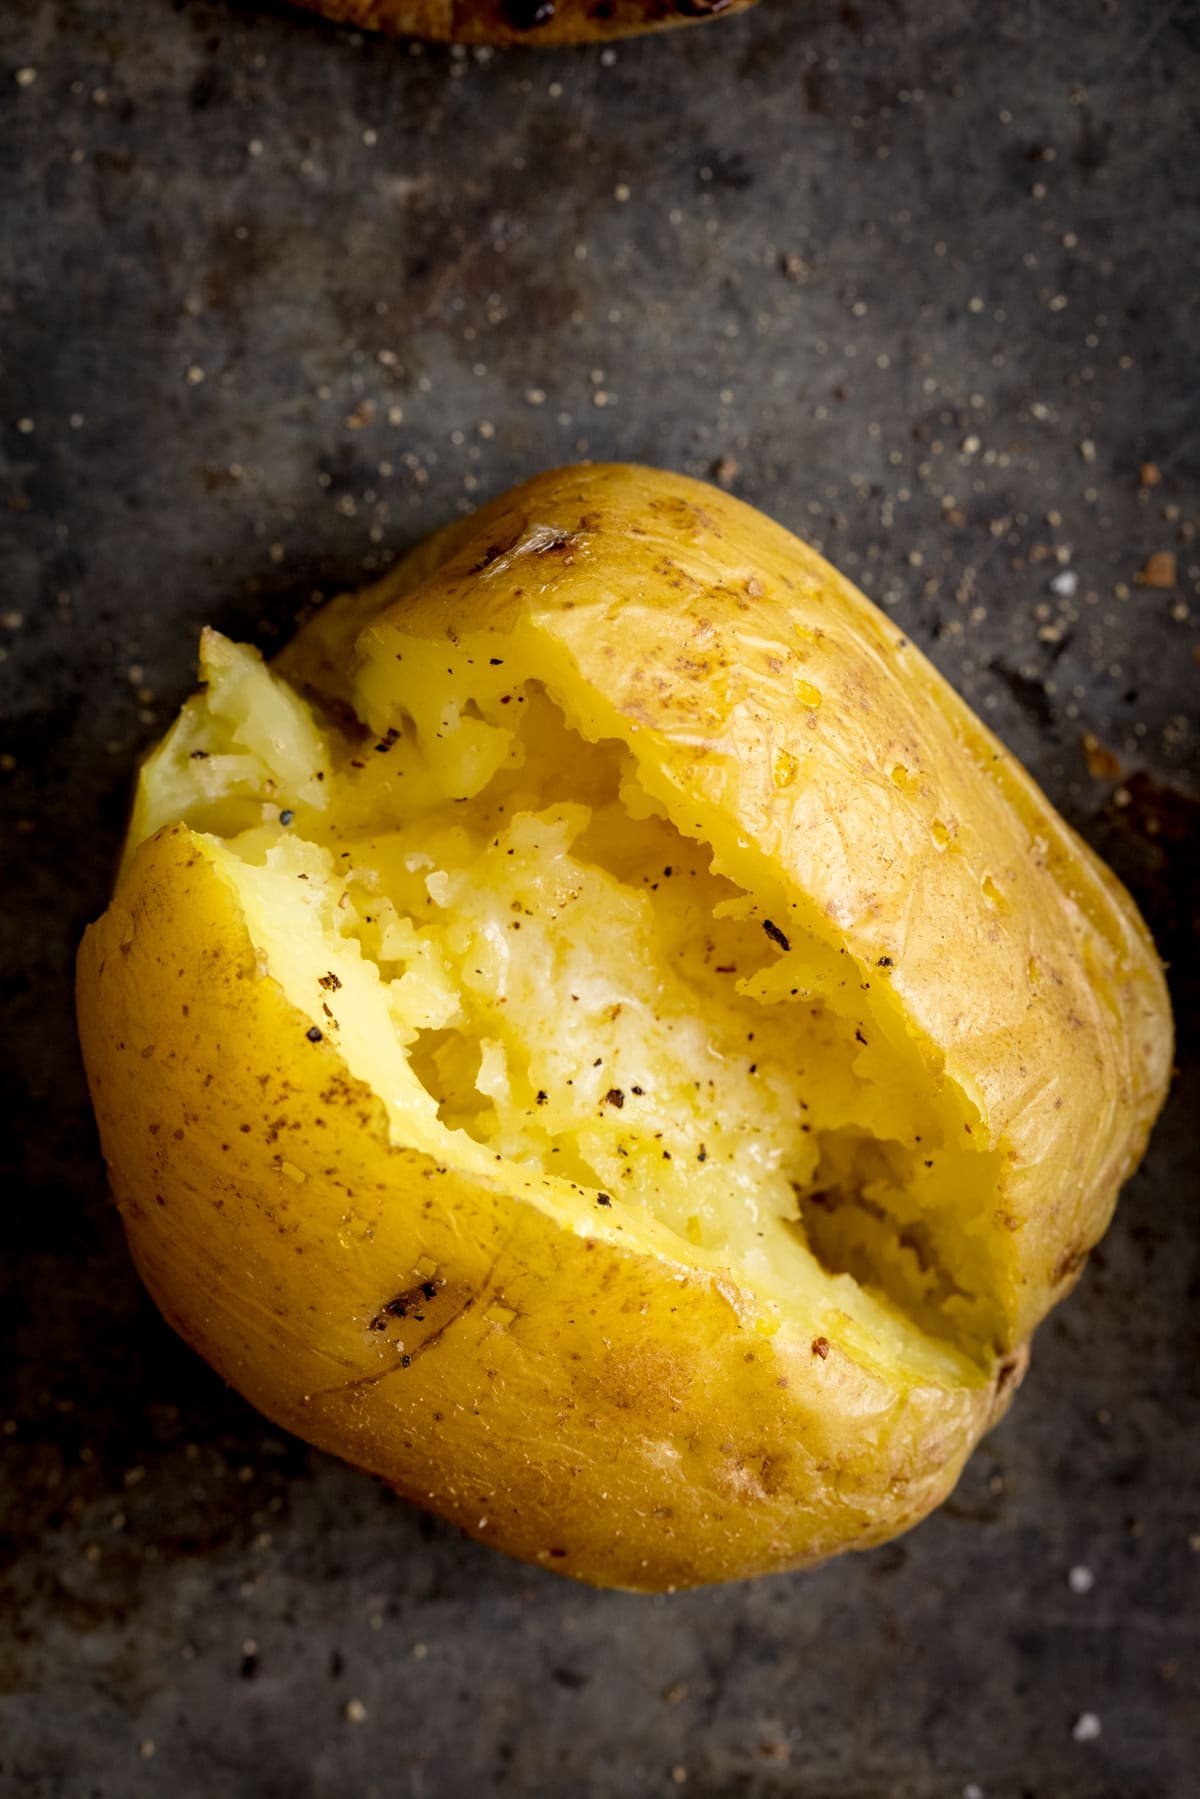 Overhead image of an open jacket potato on a dark metal background. Potato was cooked using method 6 of my baked potato experiment.